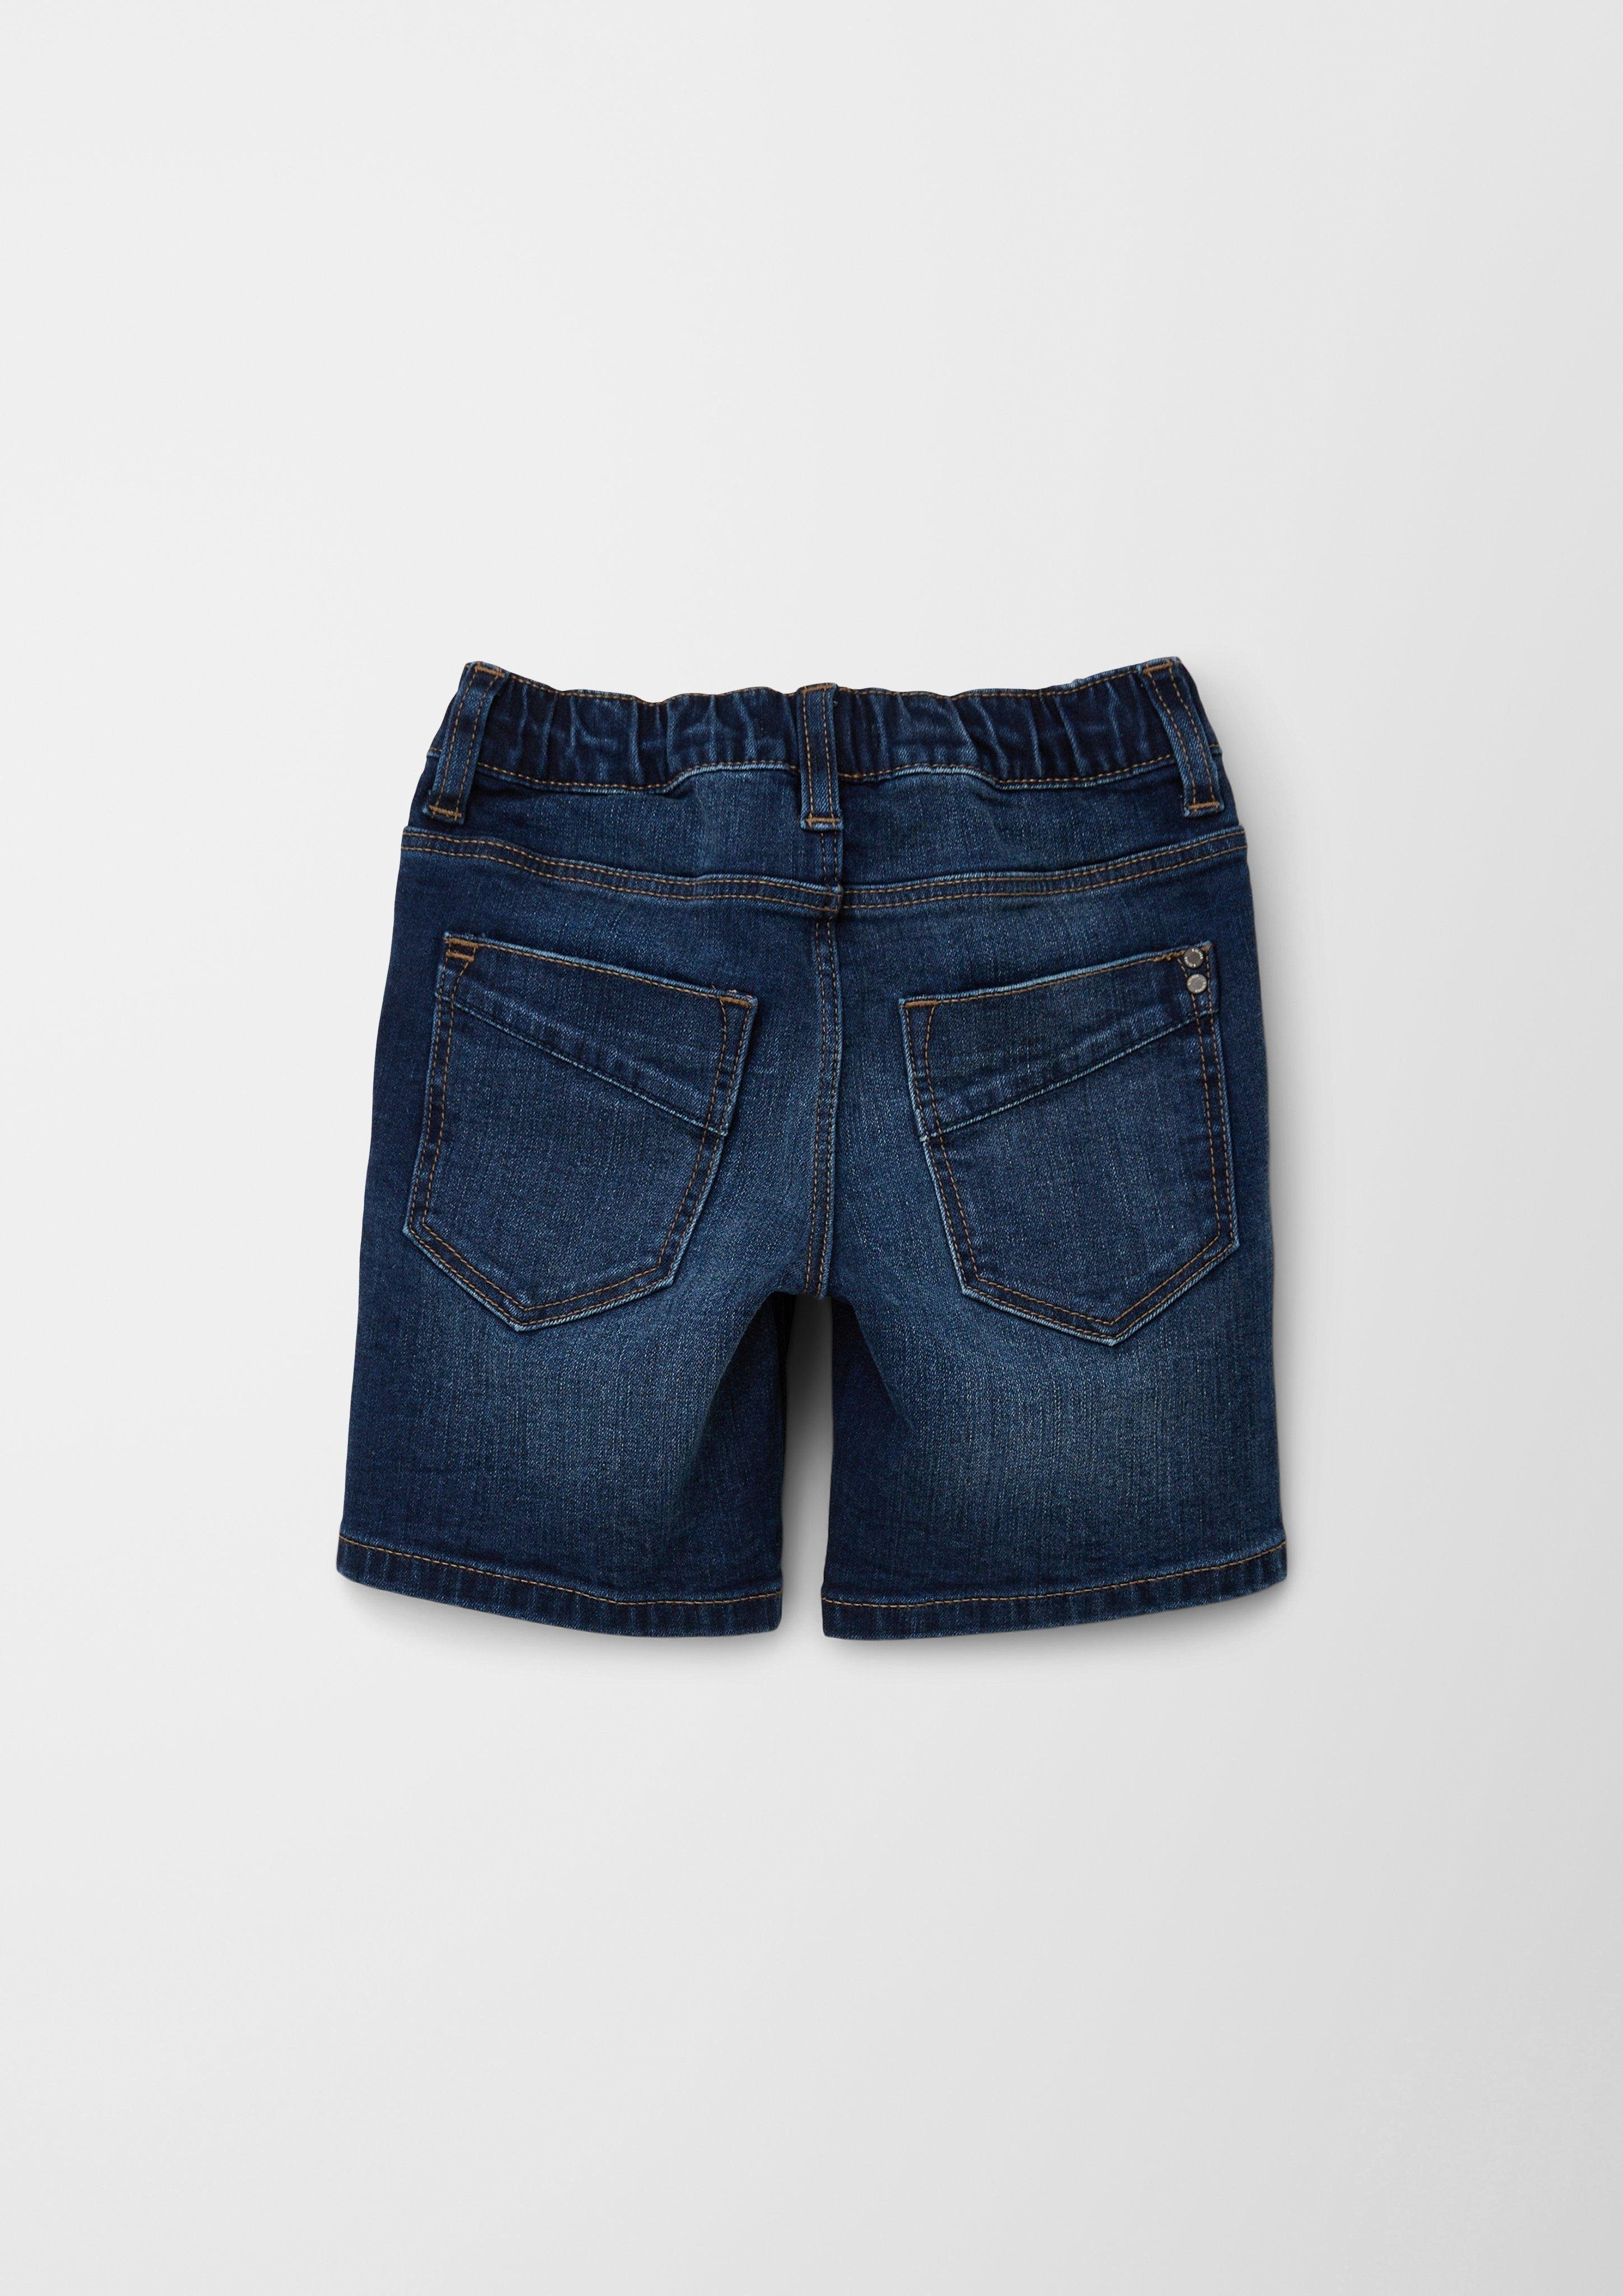 Straight Pelle / Jeansshorts Jeans Fit Mid Rise s.Oliver Leg / Waschung / Regular